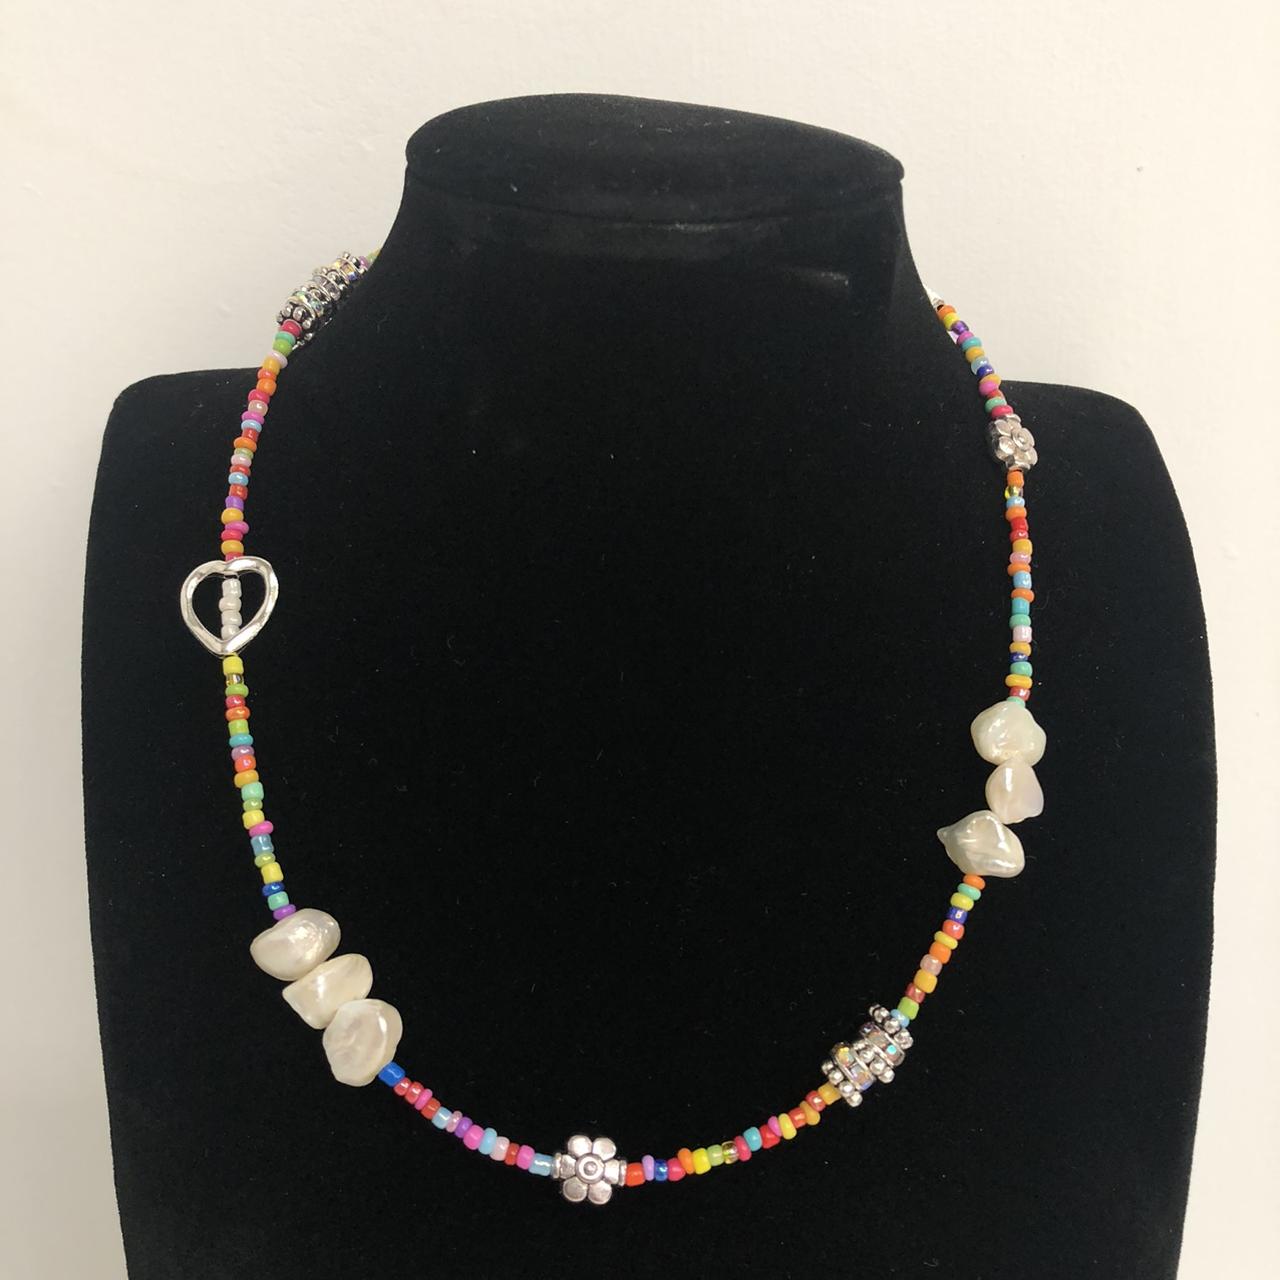 Product Image 1 - Multicolor Seed Bead Choker Necklace